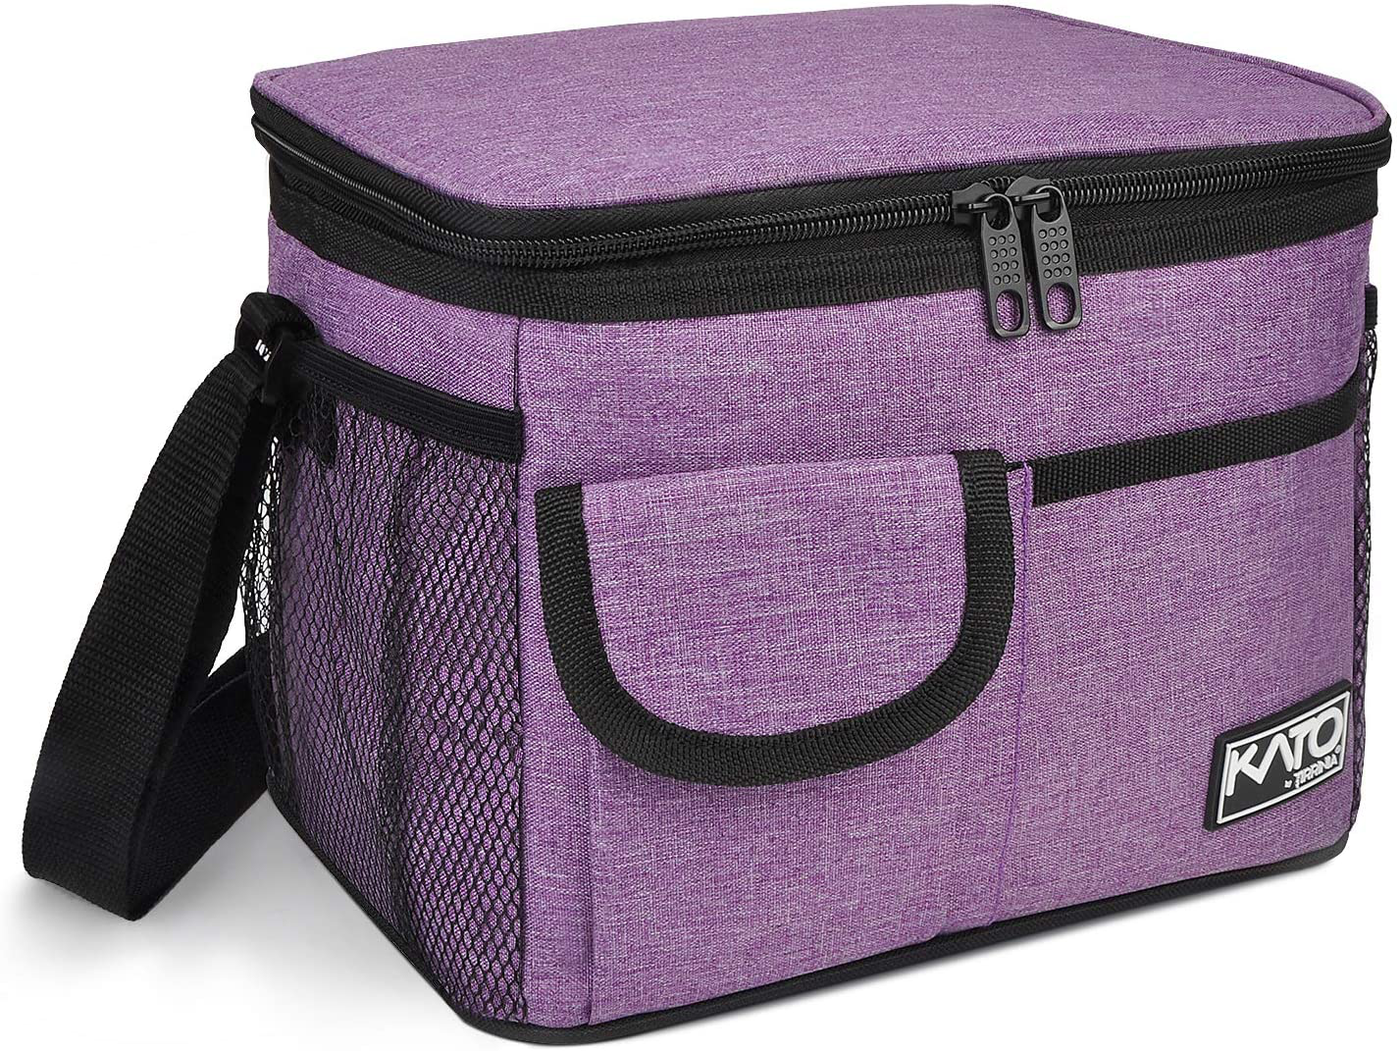 Insulated Lunch Box for Women Men, Leakproof Thermal Reusable Lunch Bag with 4 Pockets for Adult & Kids, Lunch Bag Cooler Tote for Office Work by Tirrinia, Purple